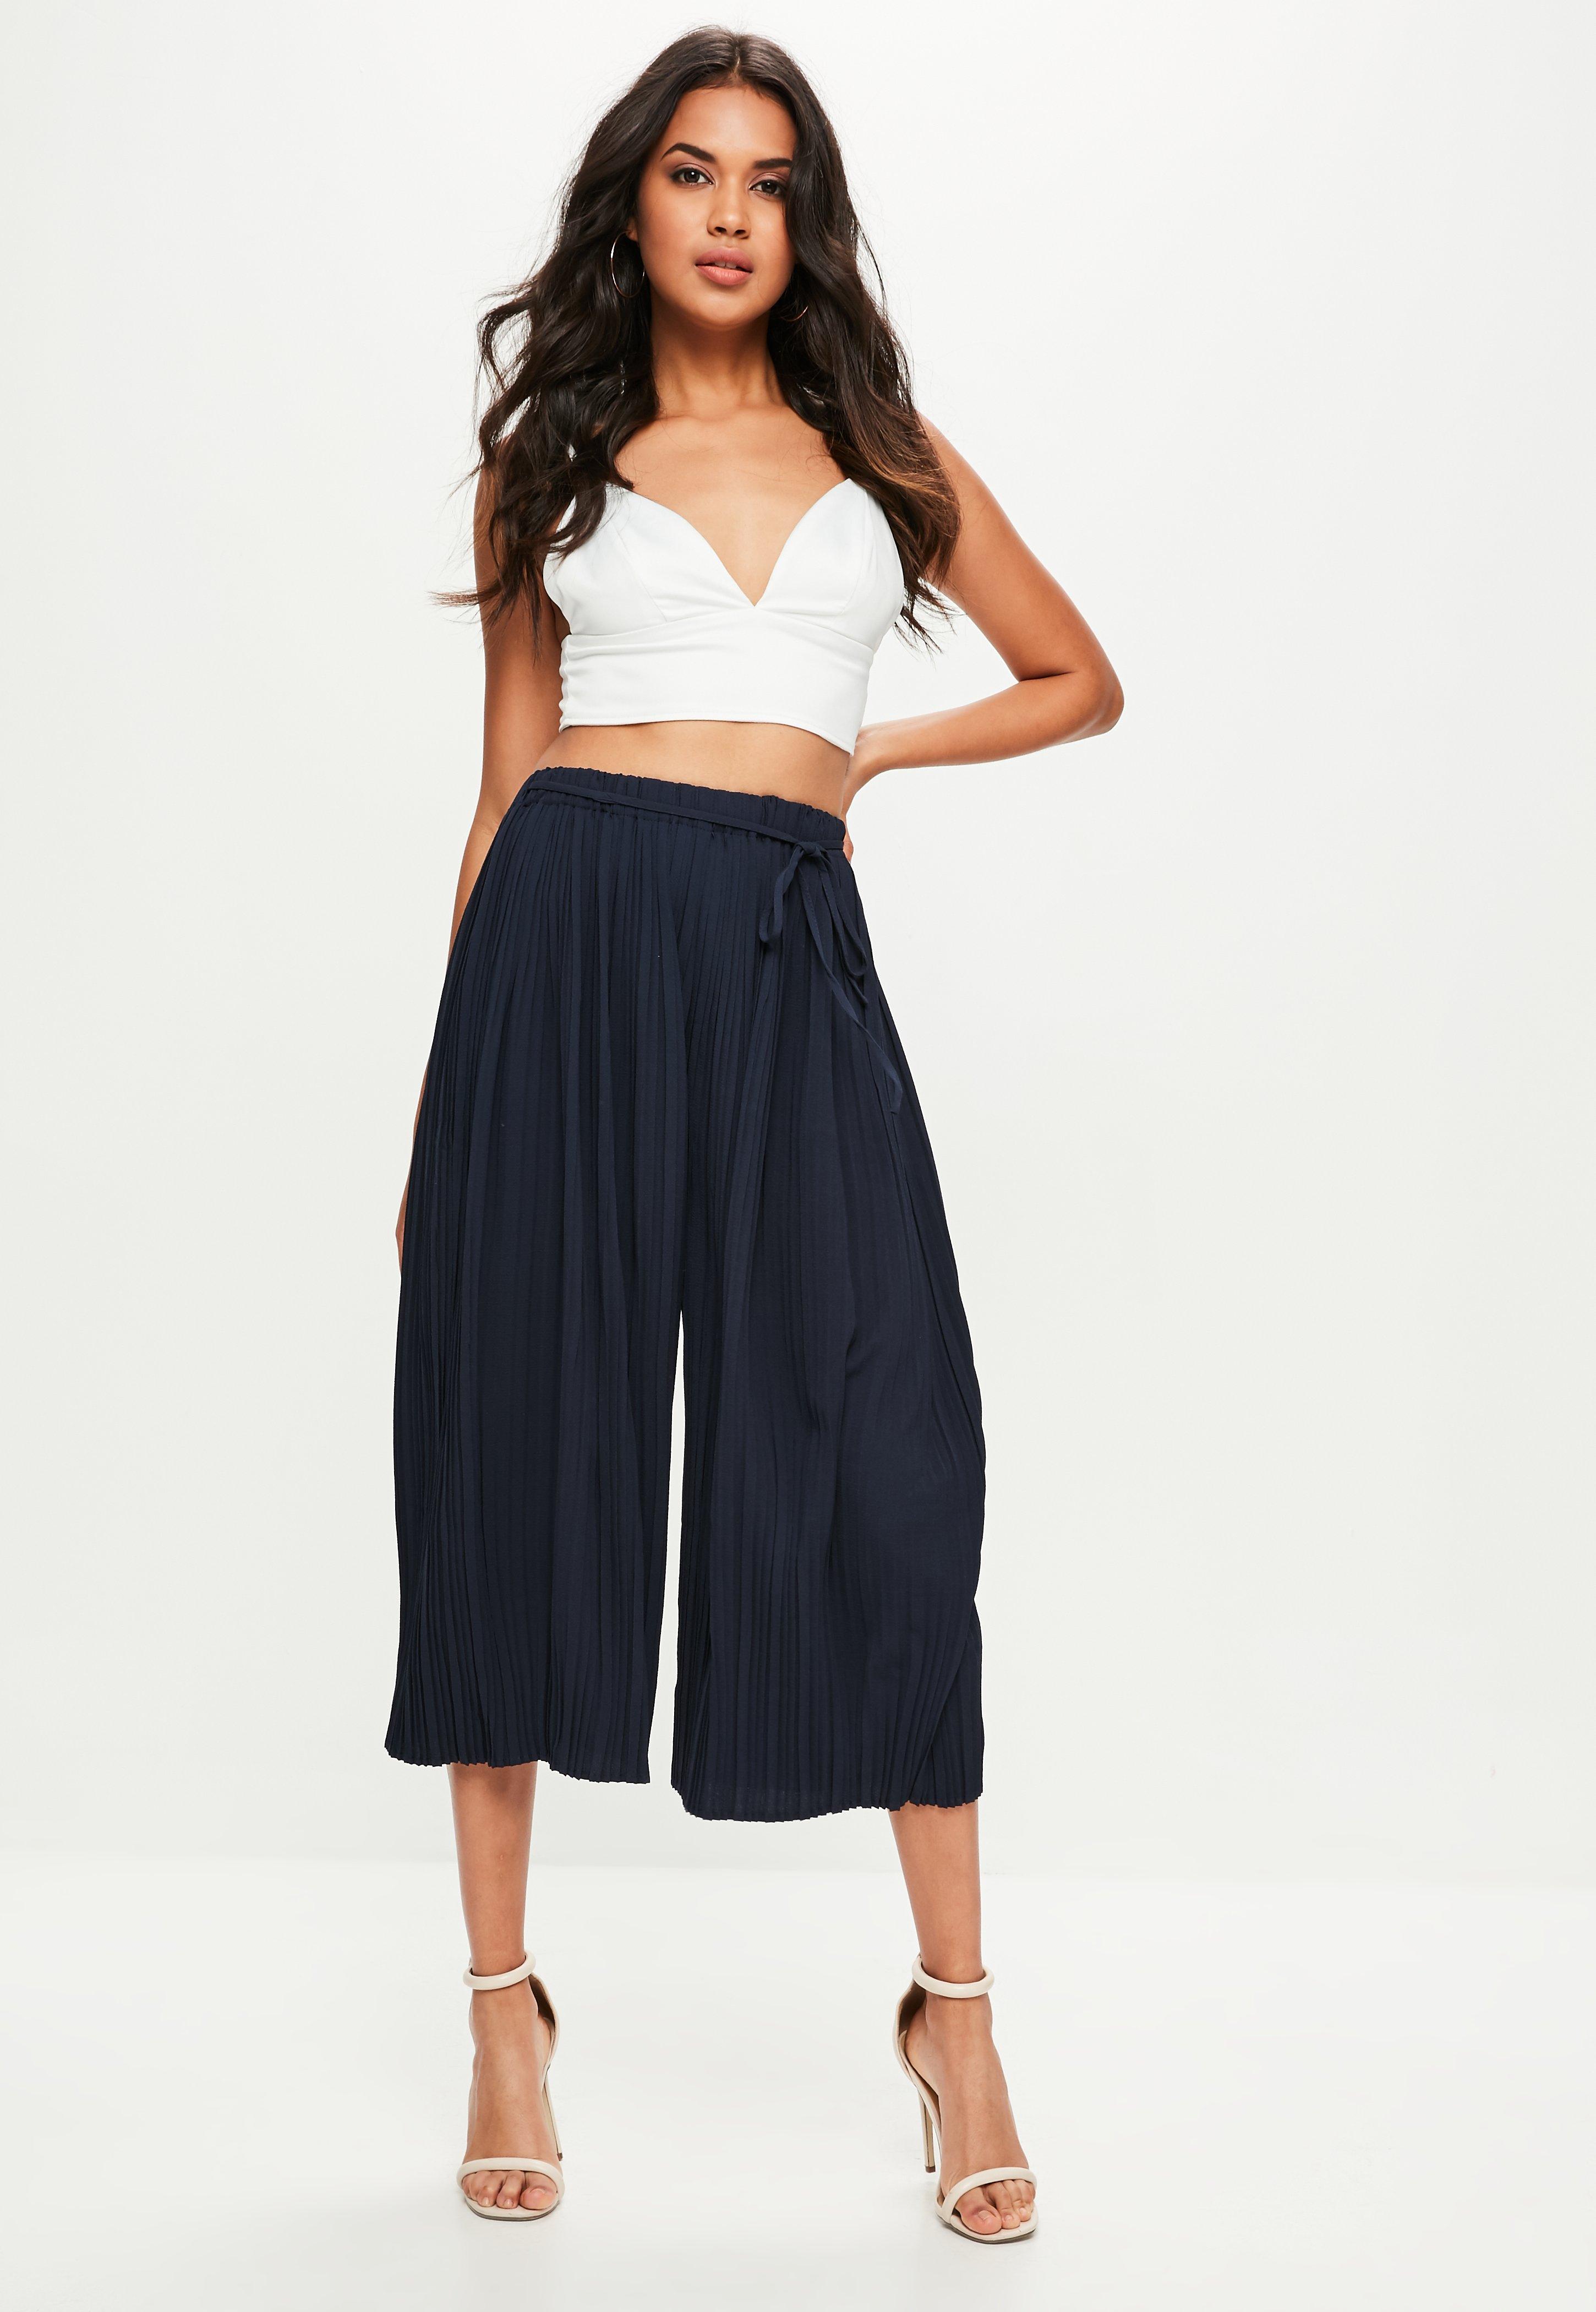 Lyst - Missguided Navy Pleated Culottes in Blue